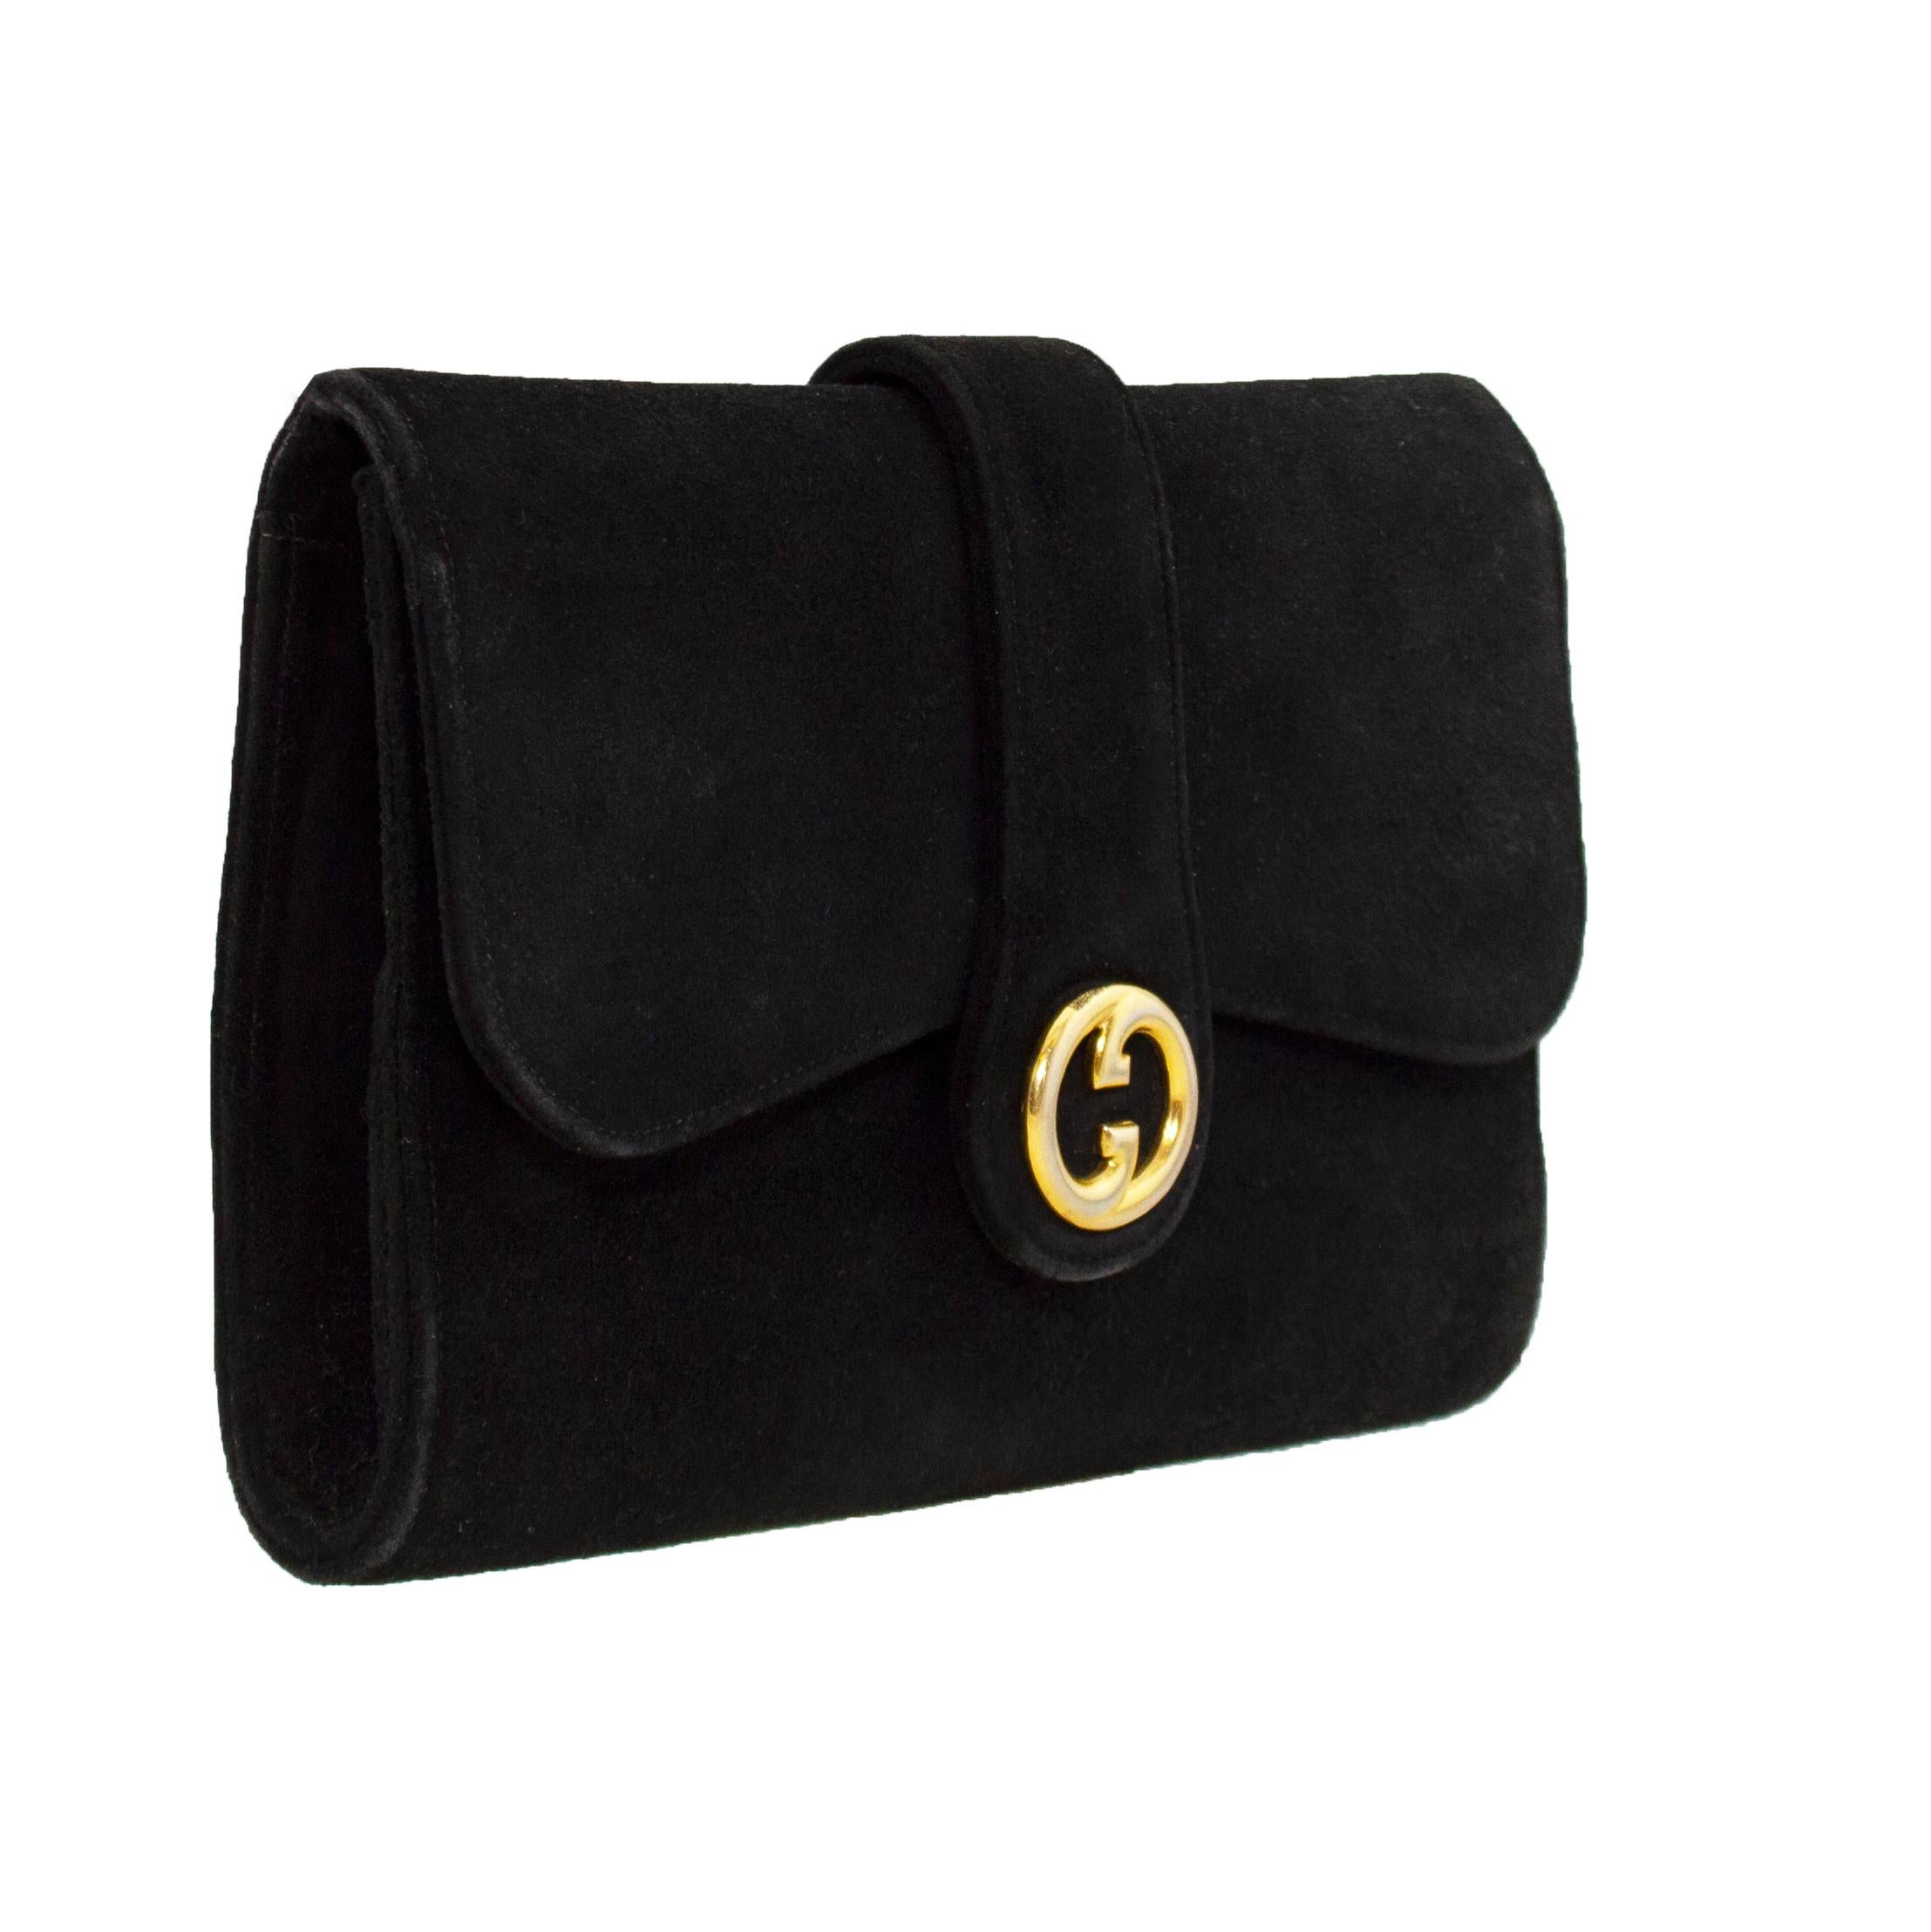 Gucci black suede evening clutch from the 1960s. Envelope shape with interlocking gold metal G logo at centre that conceal a snap closure. Black leather interior with two open slit pockets. A perfect and very versatile vintage clutch that is big